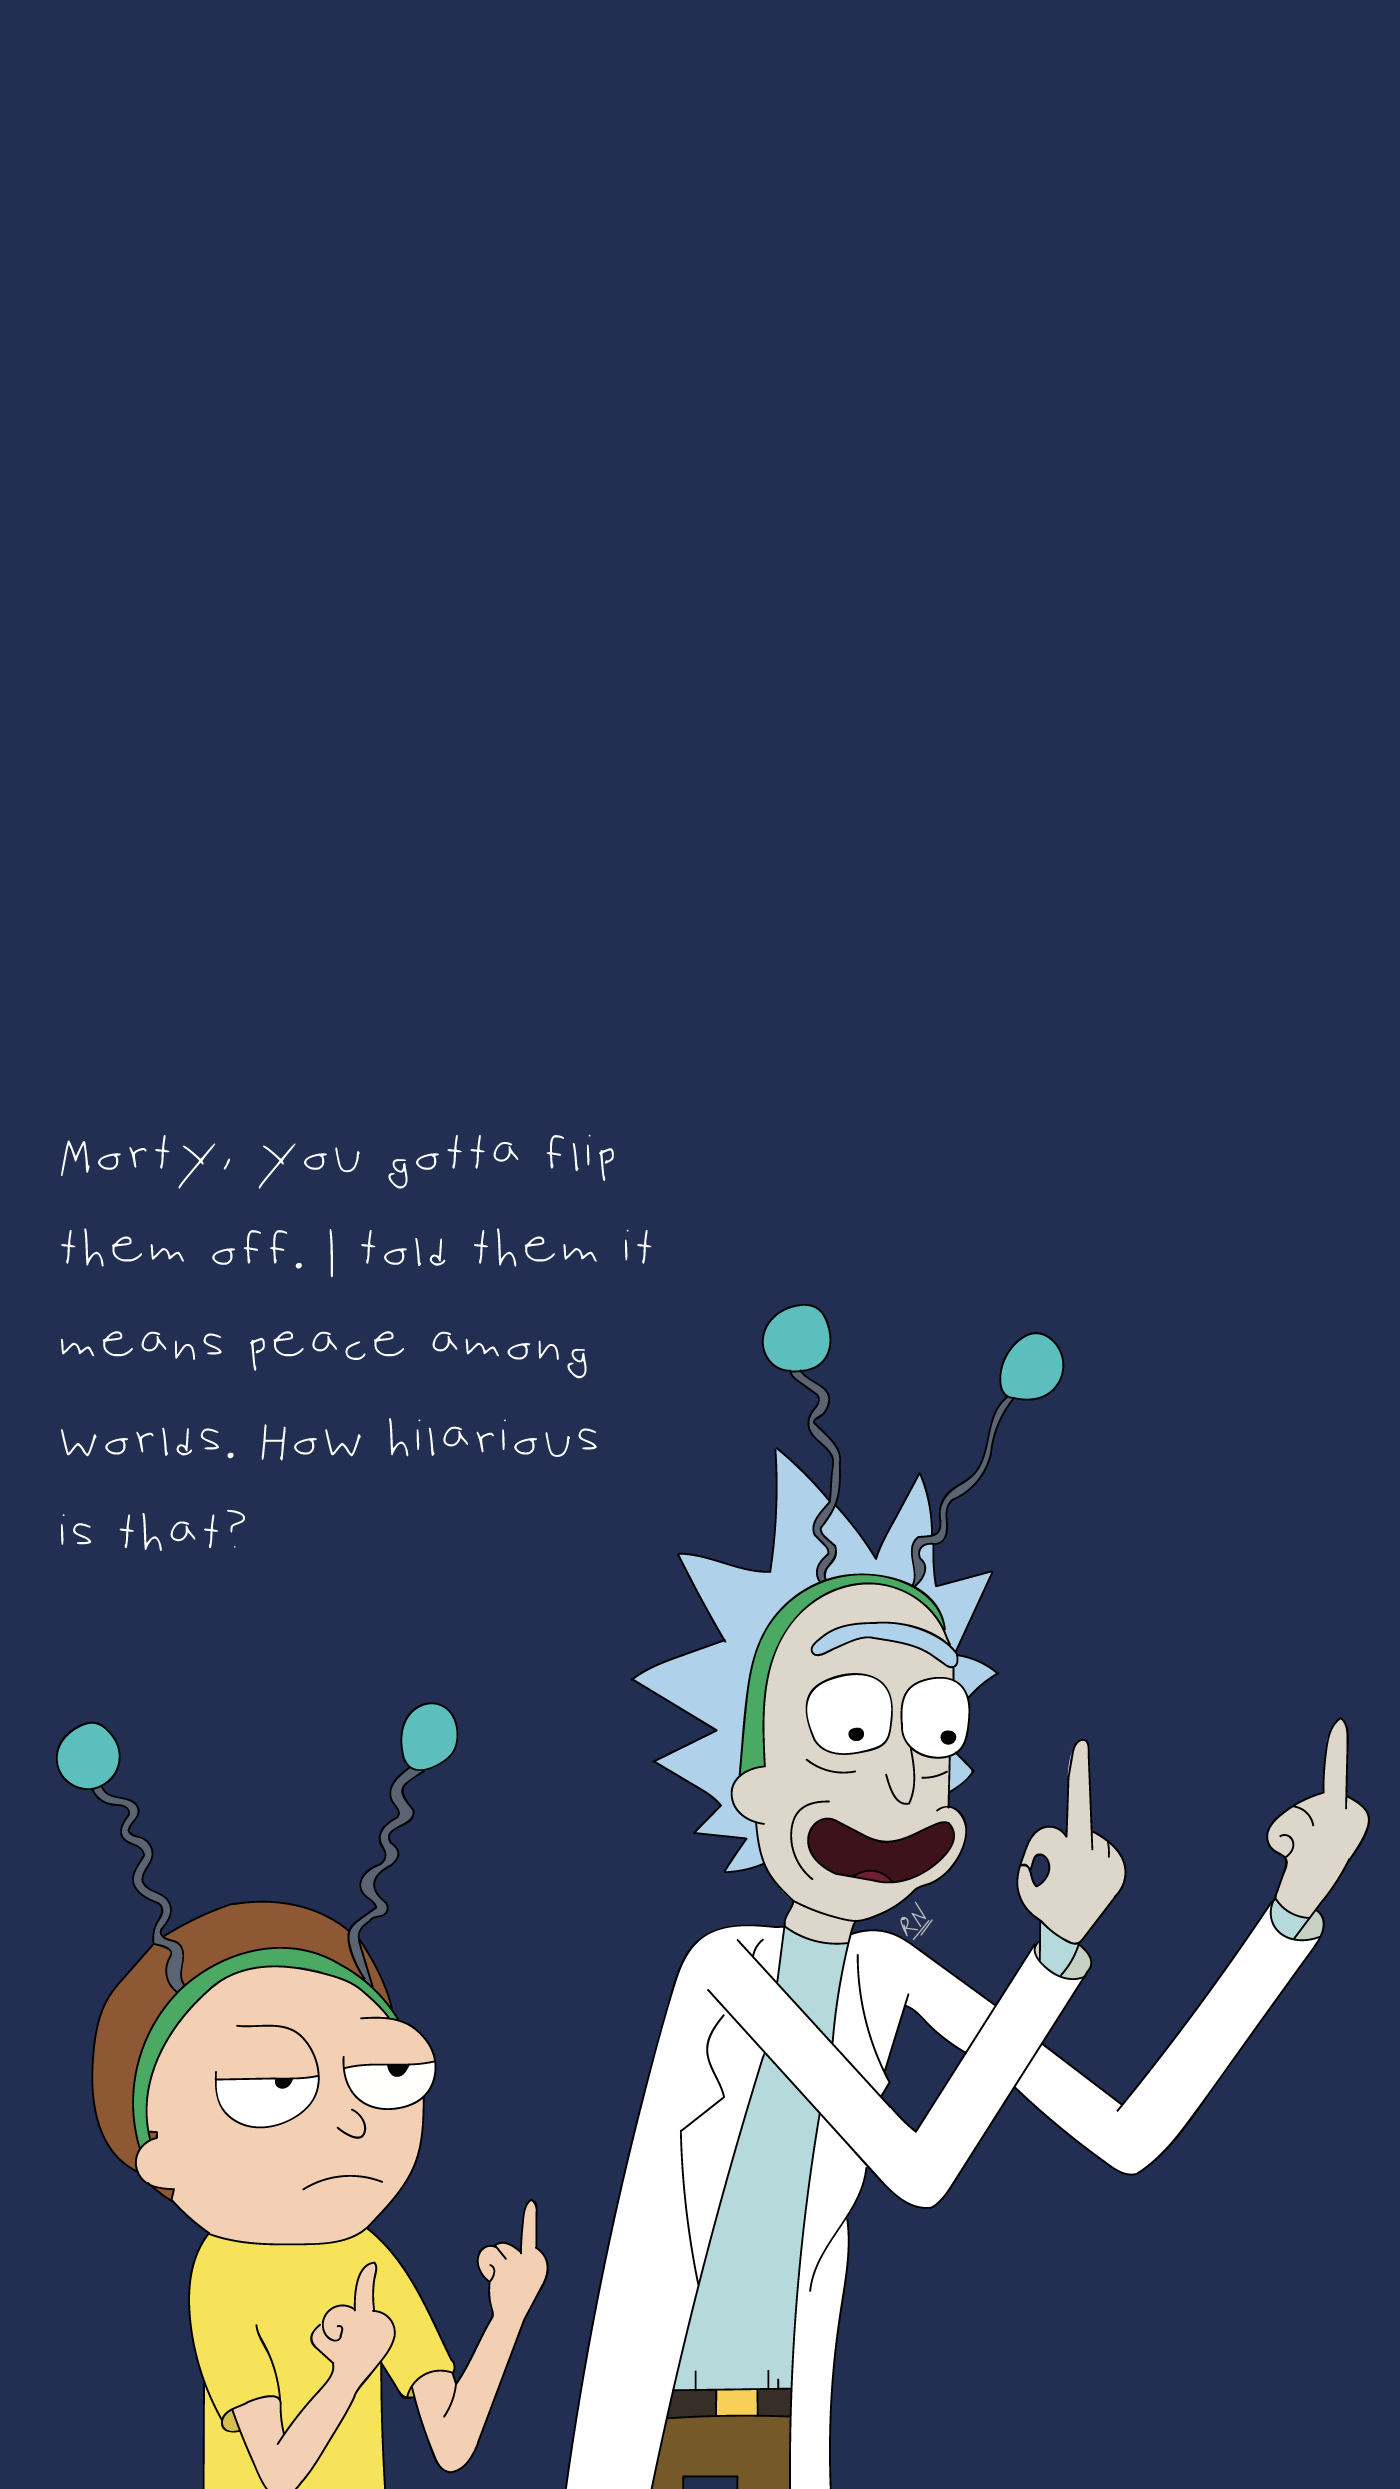 Rick and Morty phone wallpaper on Behance